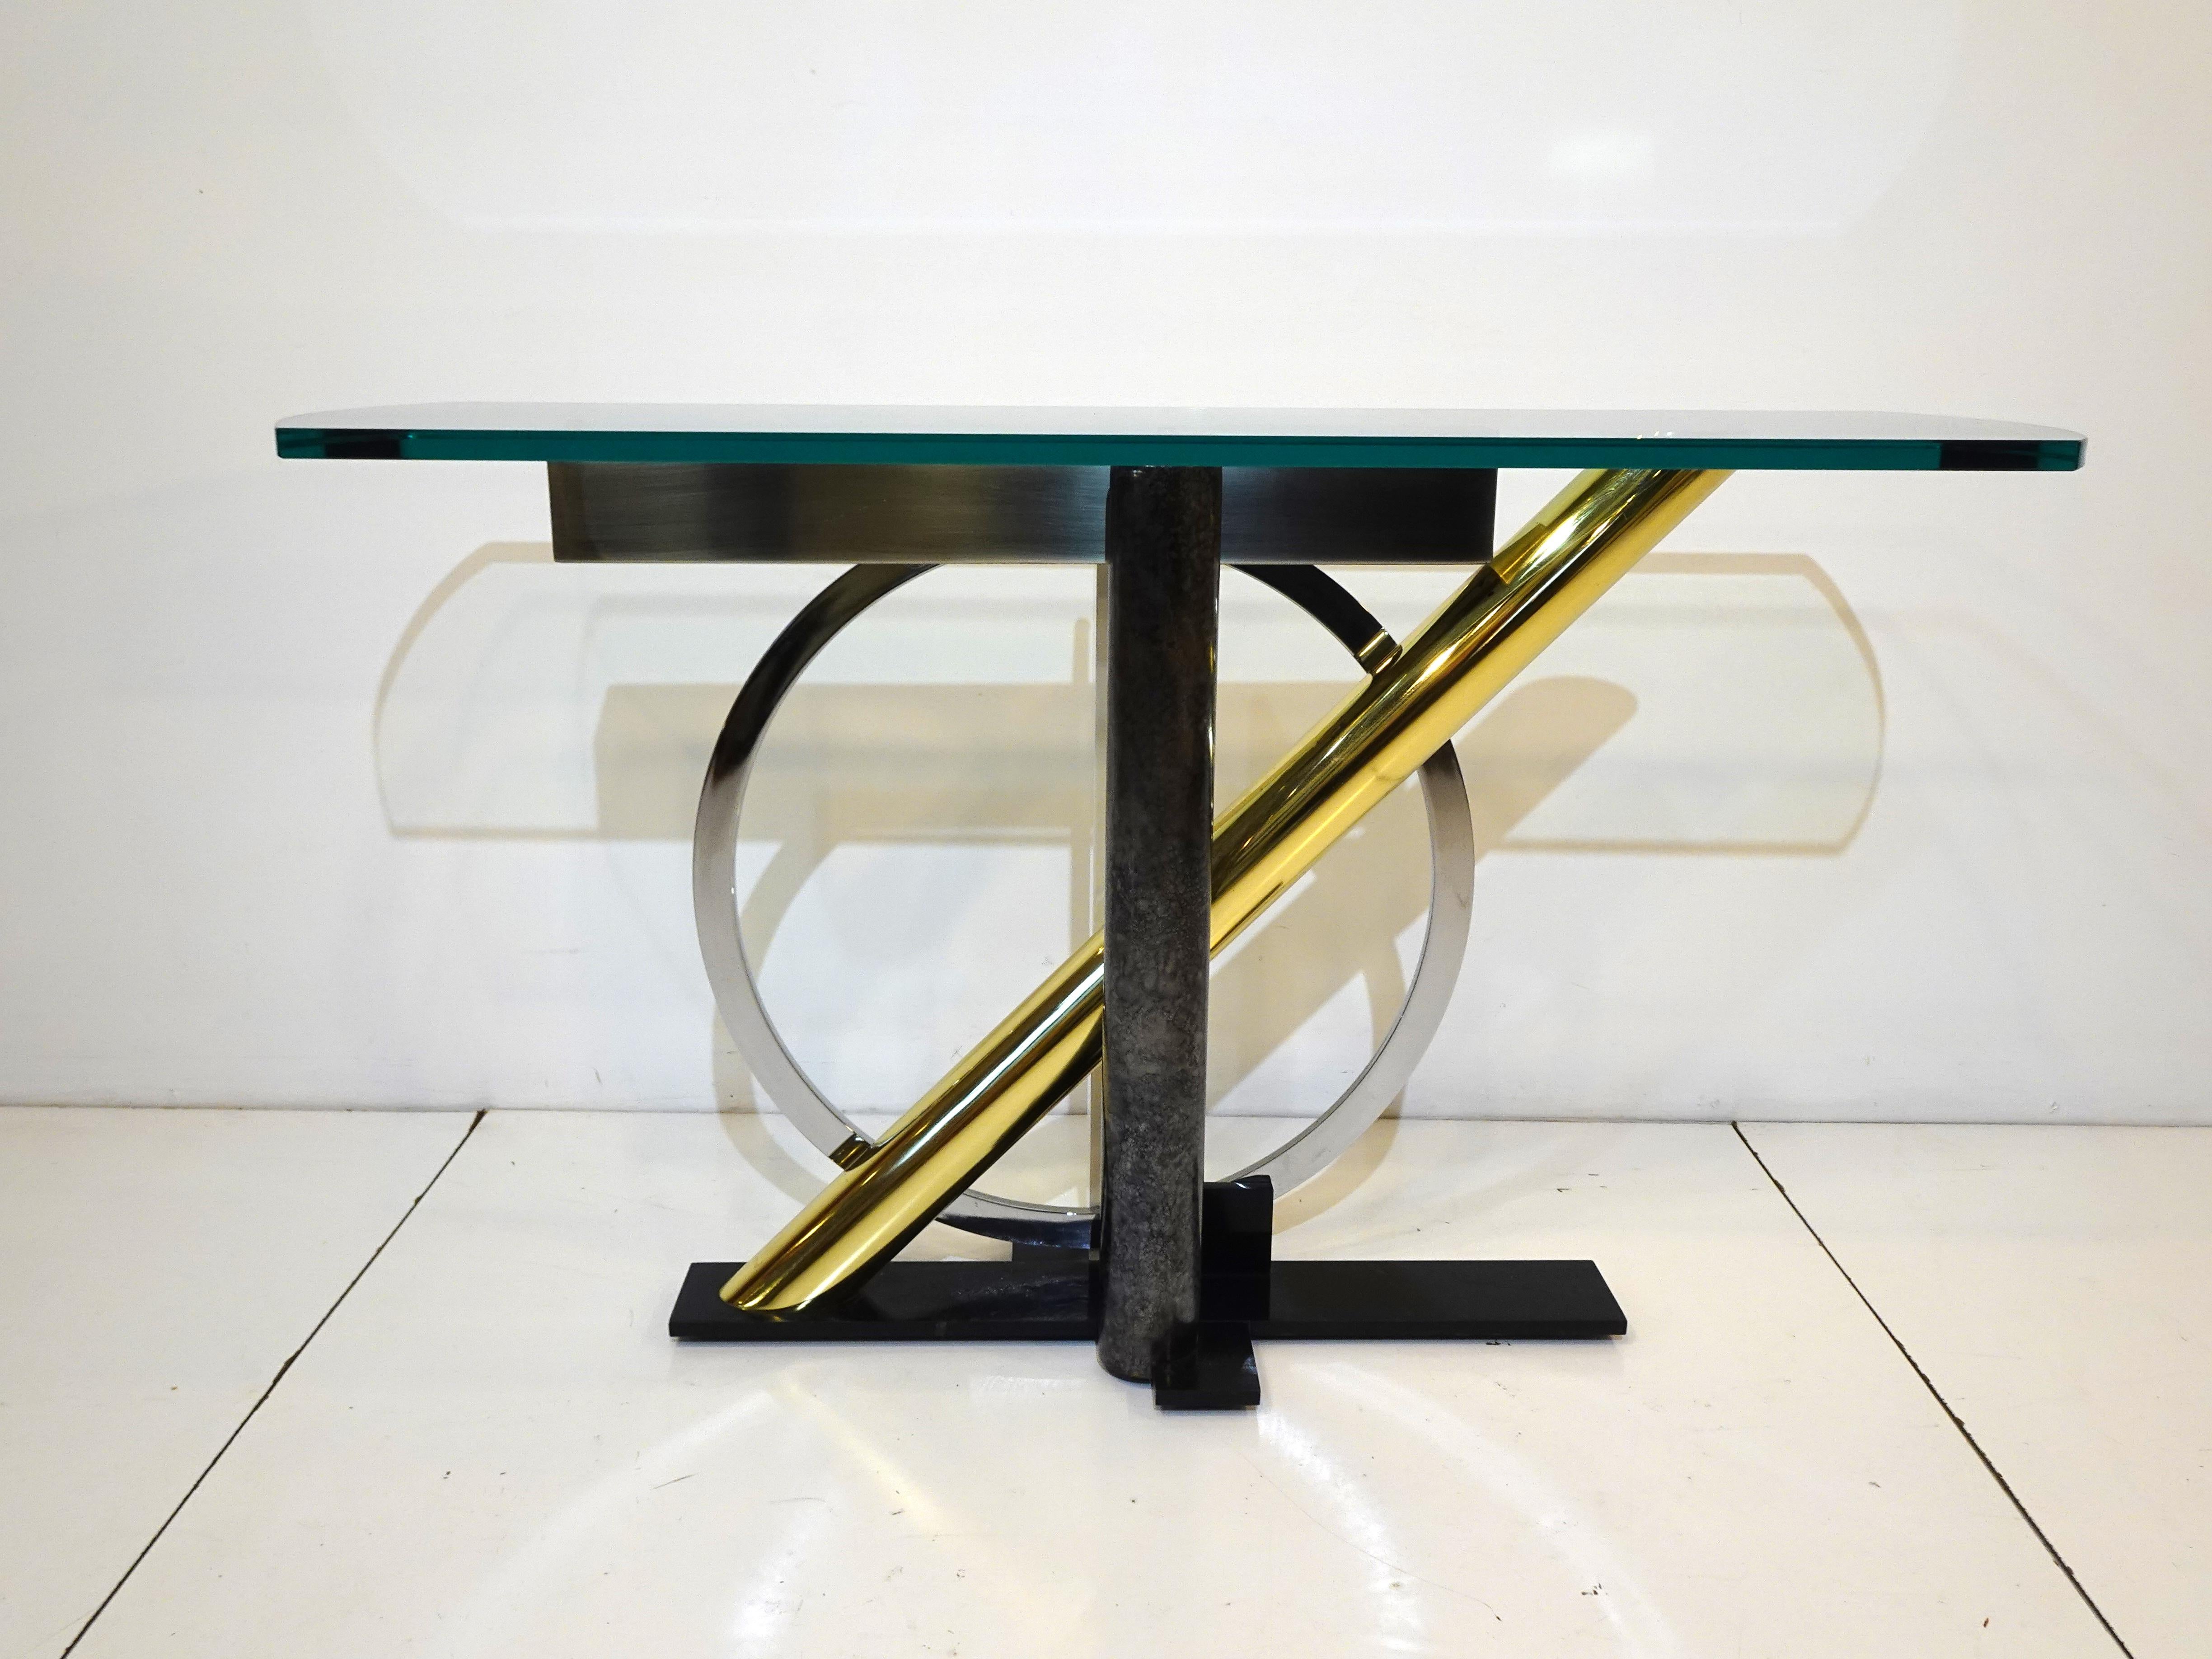 A very well crafted mixed metal console or entrance table with thick plate glass top curved on each end. The metals used are brass, stainless steel, chromed, painted white, black and faux textured silver and grays a great contracting combination of